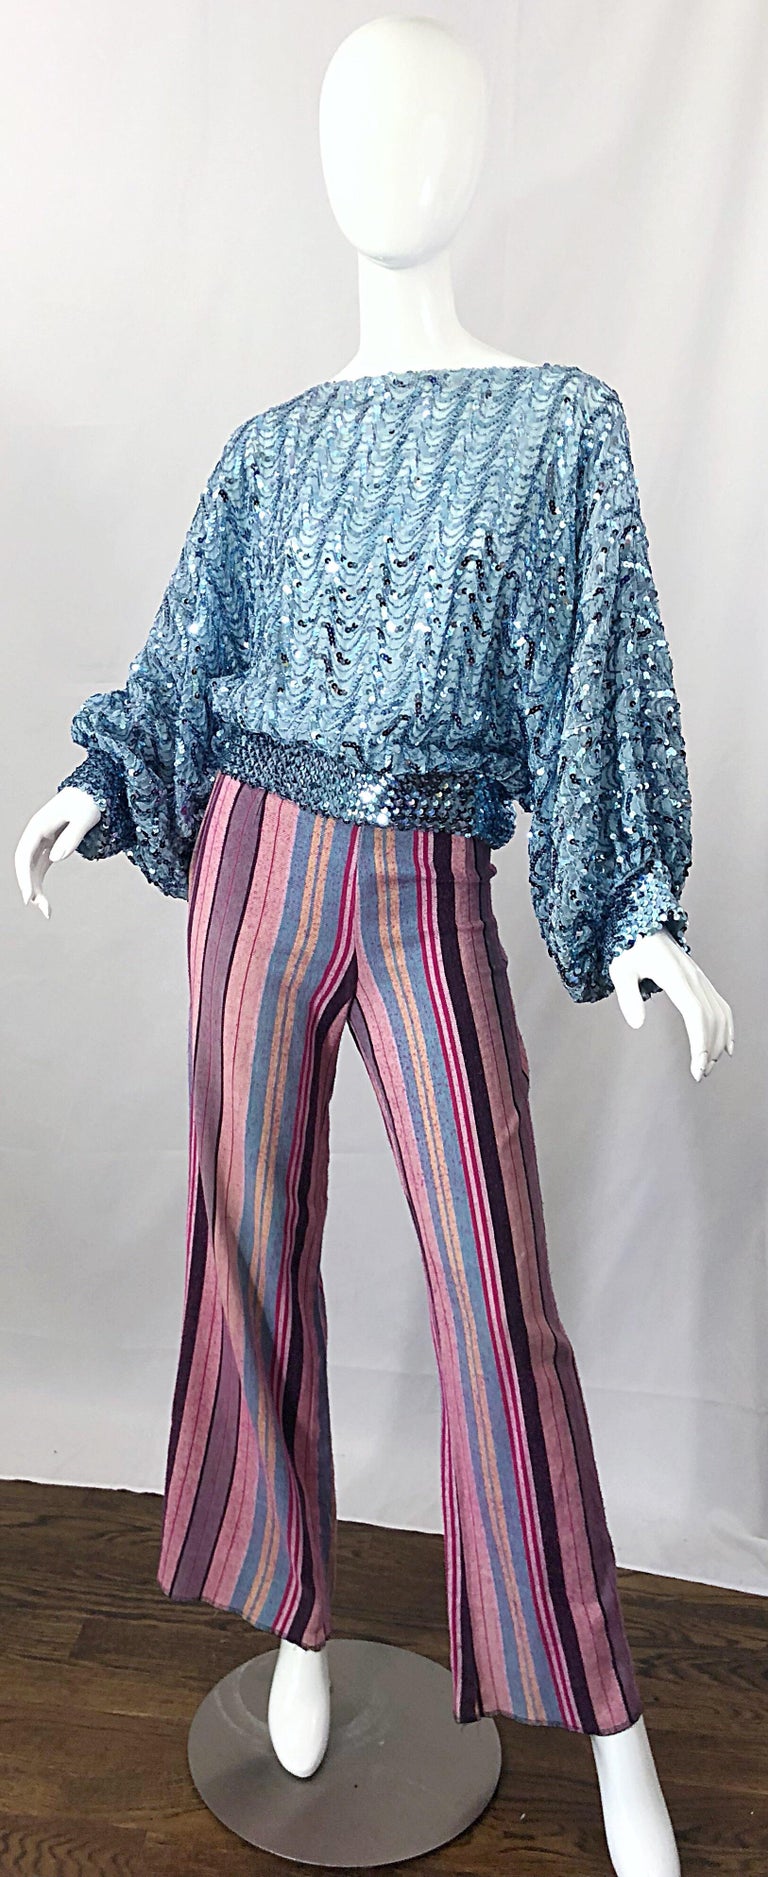 Fabulous vintage 1970s high waisted striped flared leg bell bottom trousers! Features various shades of pinks, blue, and purple throughout. Full metal zipper up the side. Pockets at each side of the rear. The pictured 70s blue sequin top looks great